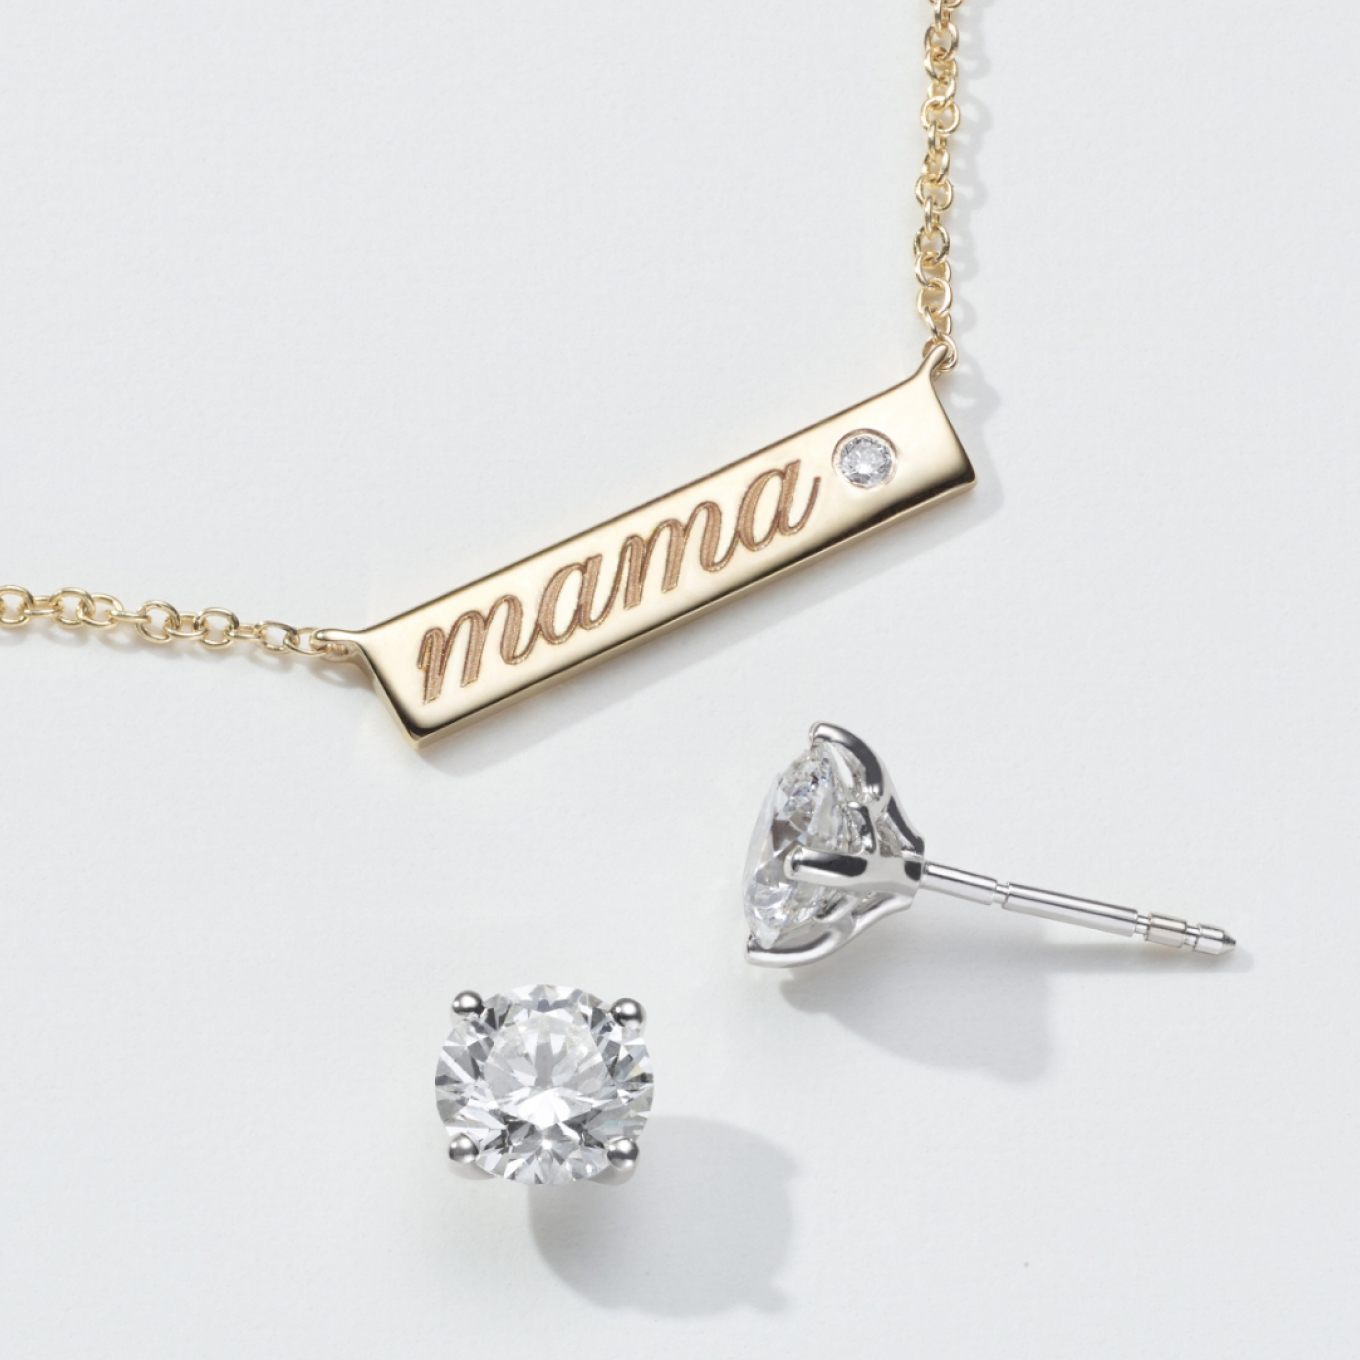 Featuring a natural diamond accent for a touch of sparkle, this this 14-karat yellow gold bar necklace is the perfect canvas for a custom engraving. A matching cable chain with a lobster clasp offers worry-free daily wear.